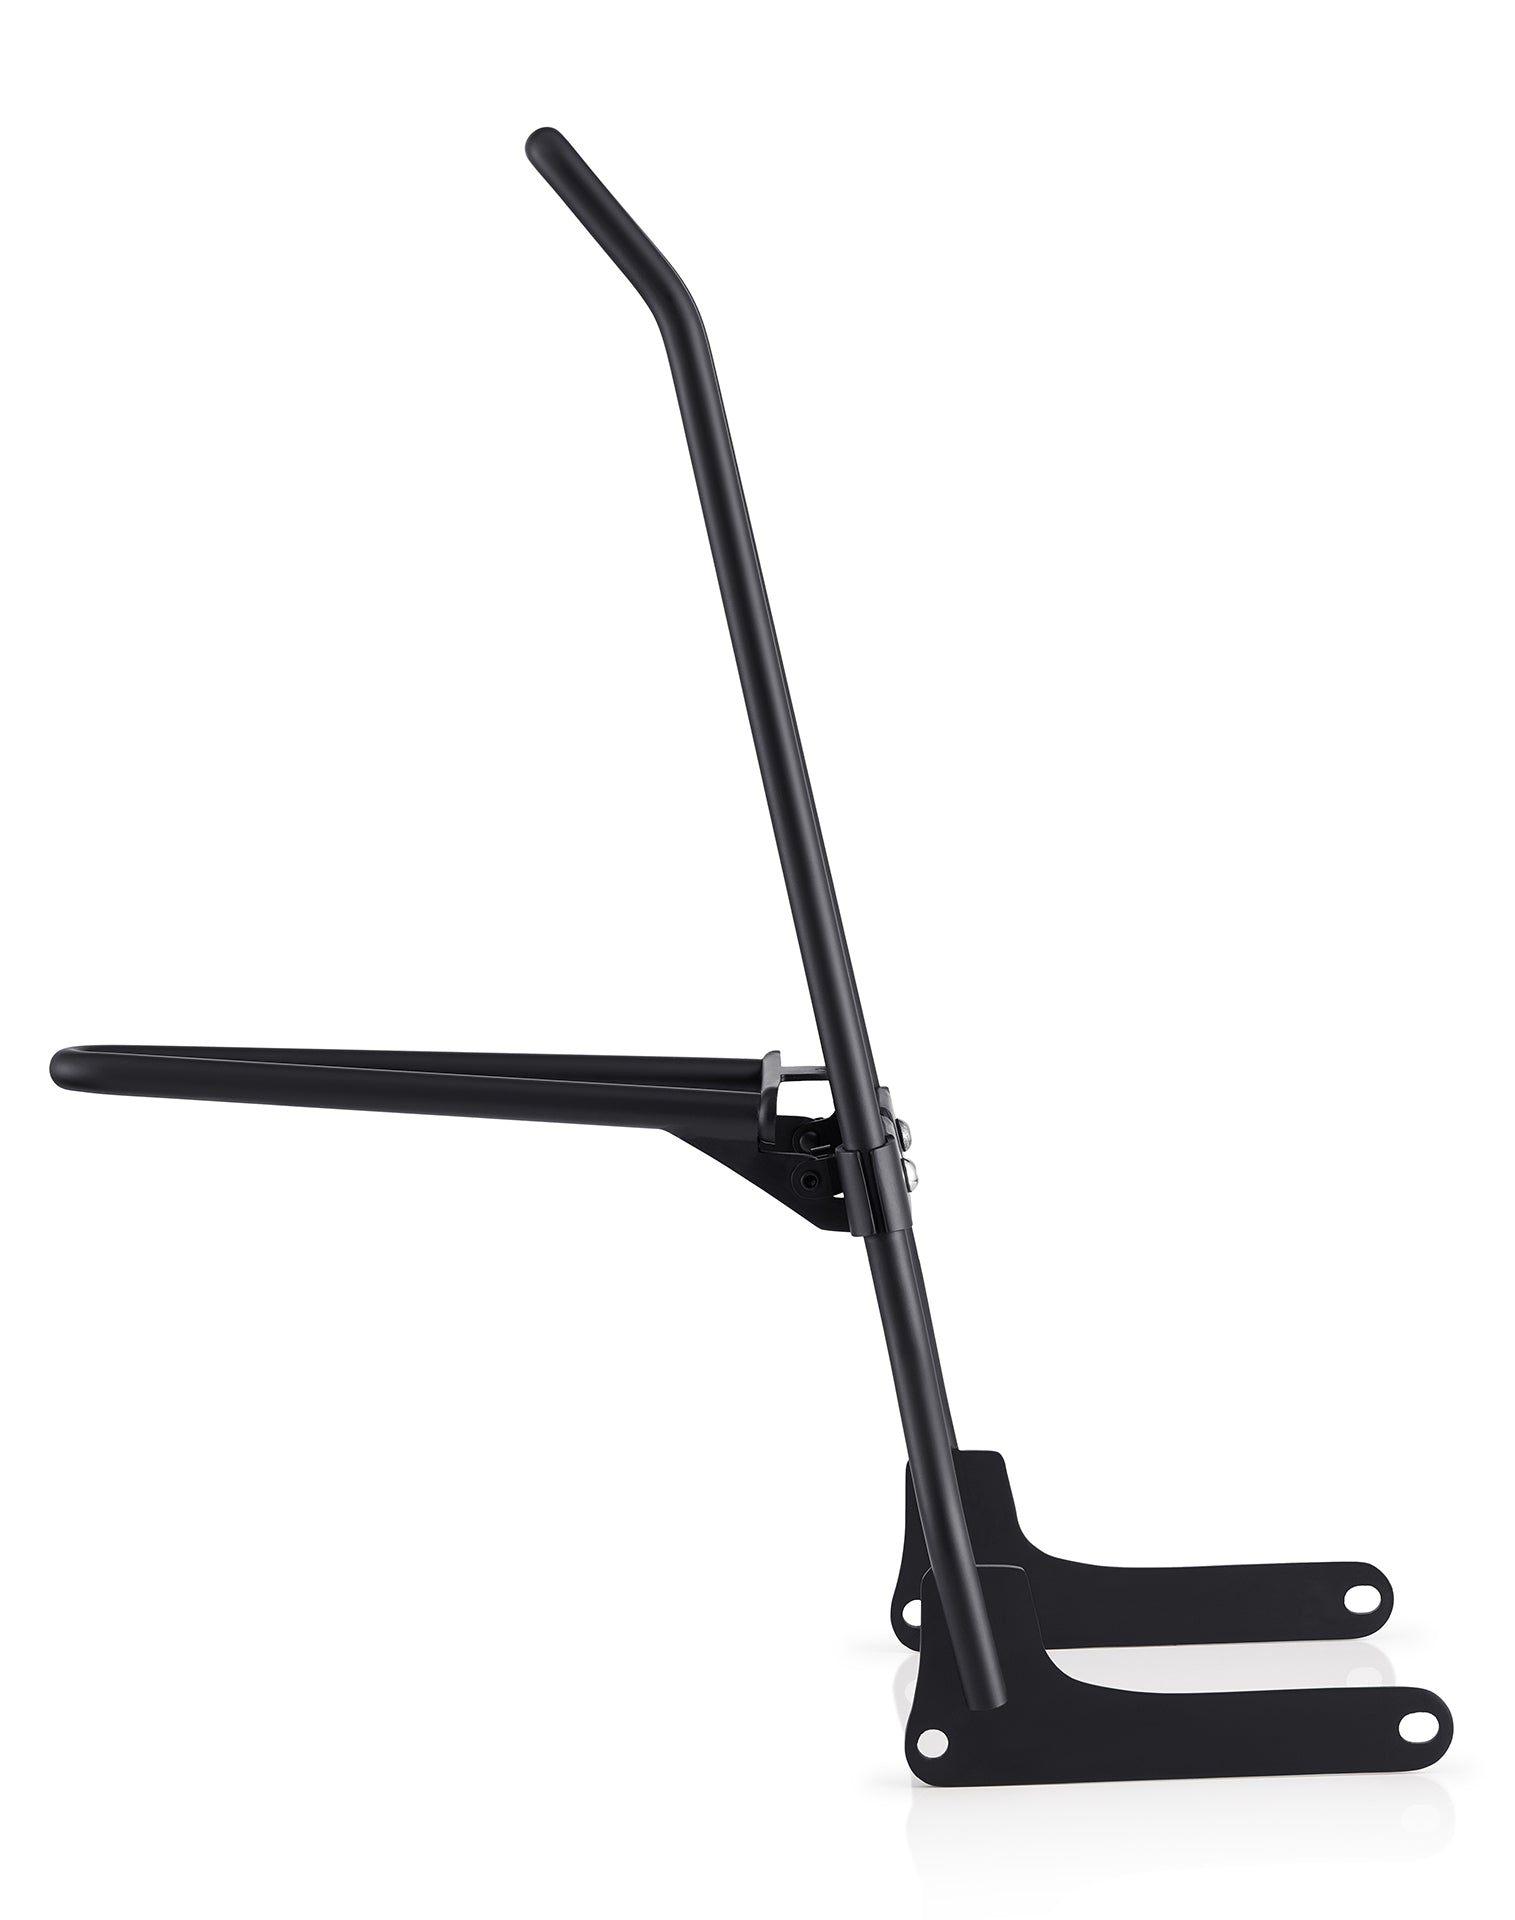 Iron Born Blade 25" Sissy Bar with Foldable Luggage Rack for Harley Softail Slim Matte Black